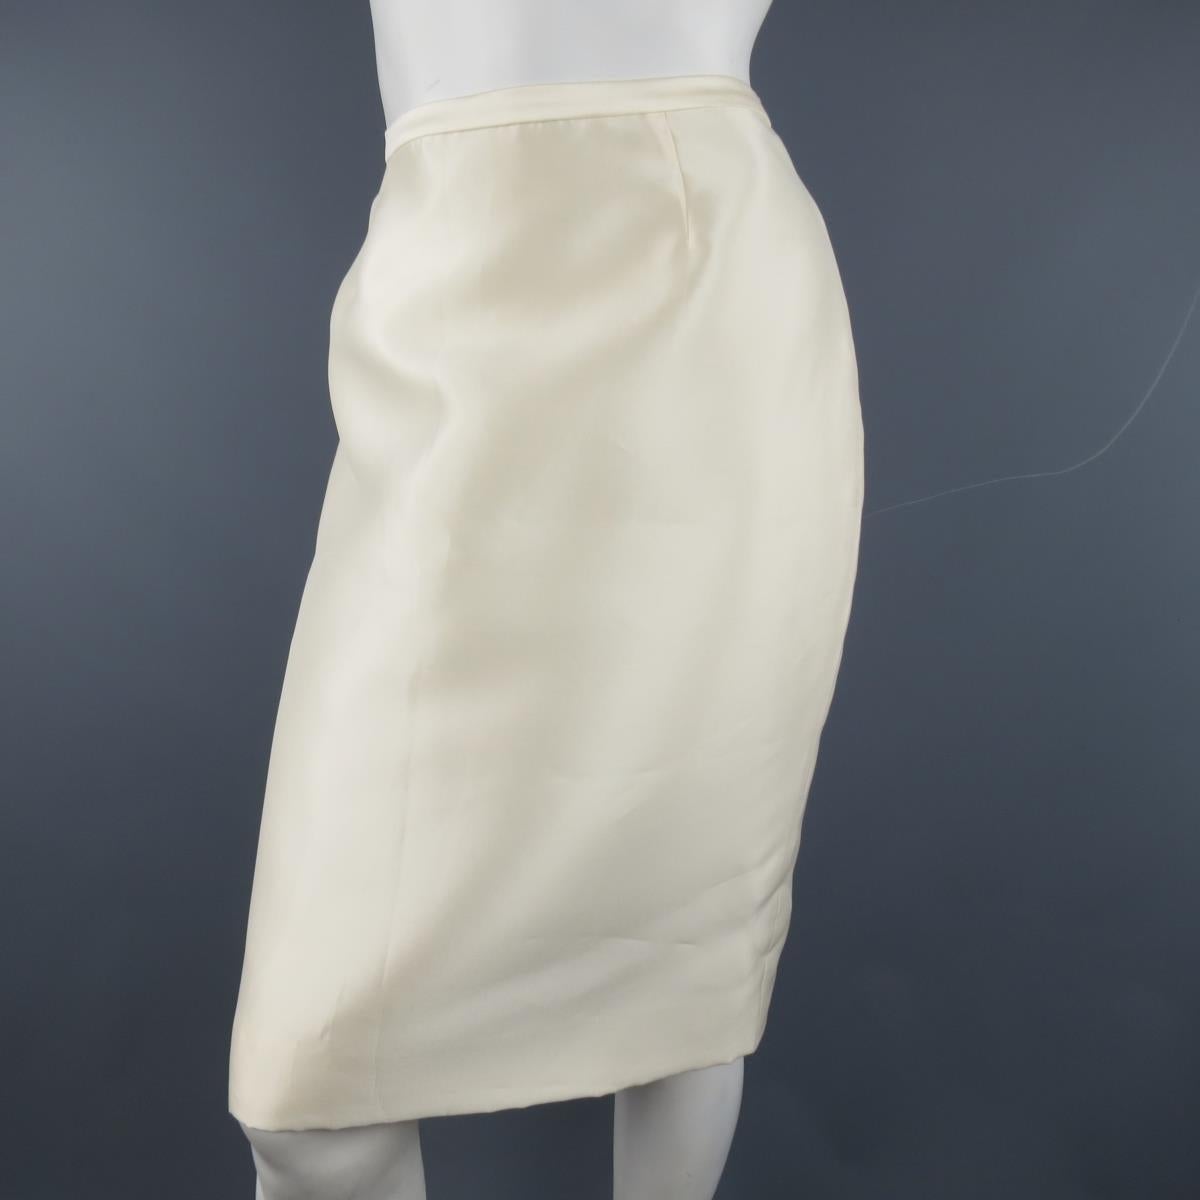 BADGLEY MISCHKA pencil skirt in a cream structured satin material with hidden back zip closure. Made in USA.
Excellent Pre-Owned Condition. 
 

Marked:   6 USA 
 

Measurements: 
  
l	Waste: 29 In.
l	Hips: 39 In. 
l	Length: 22 In.

  
  
  
